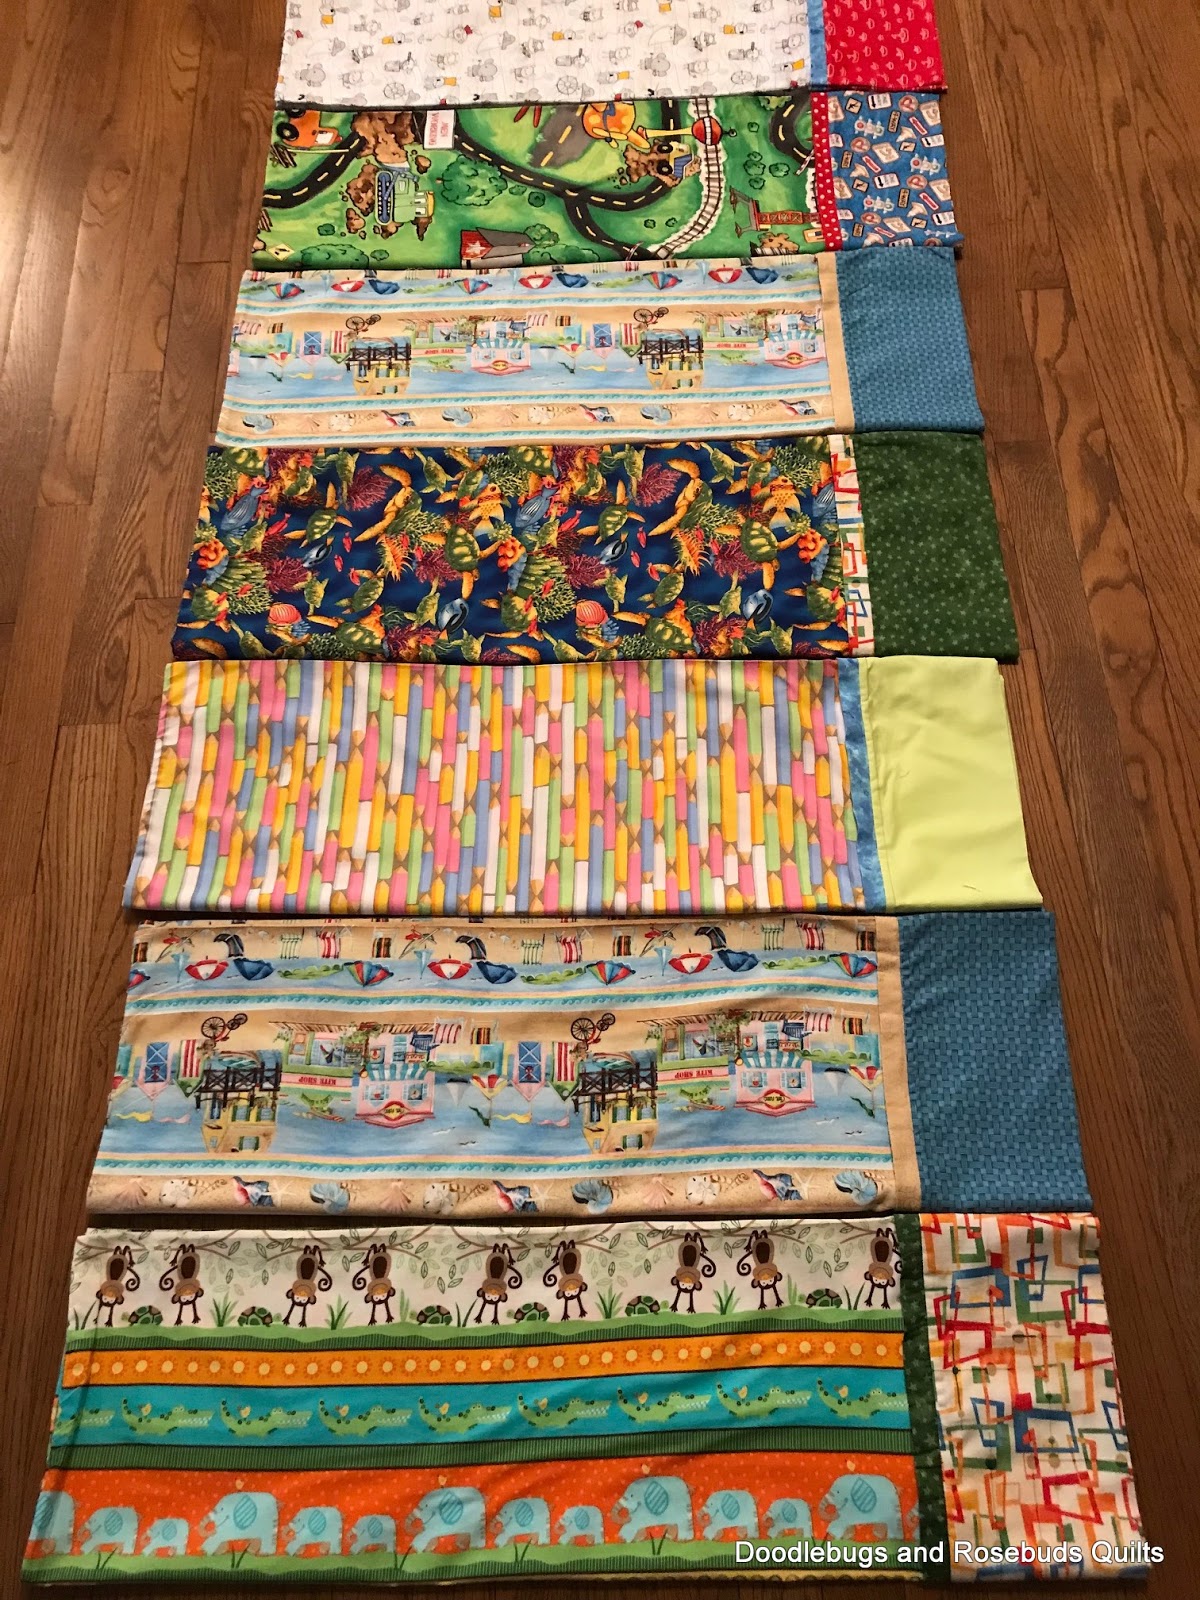 Doodlebugs and Rosebuds Quilts: Mystery and Pillow Cases